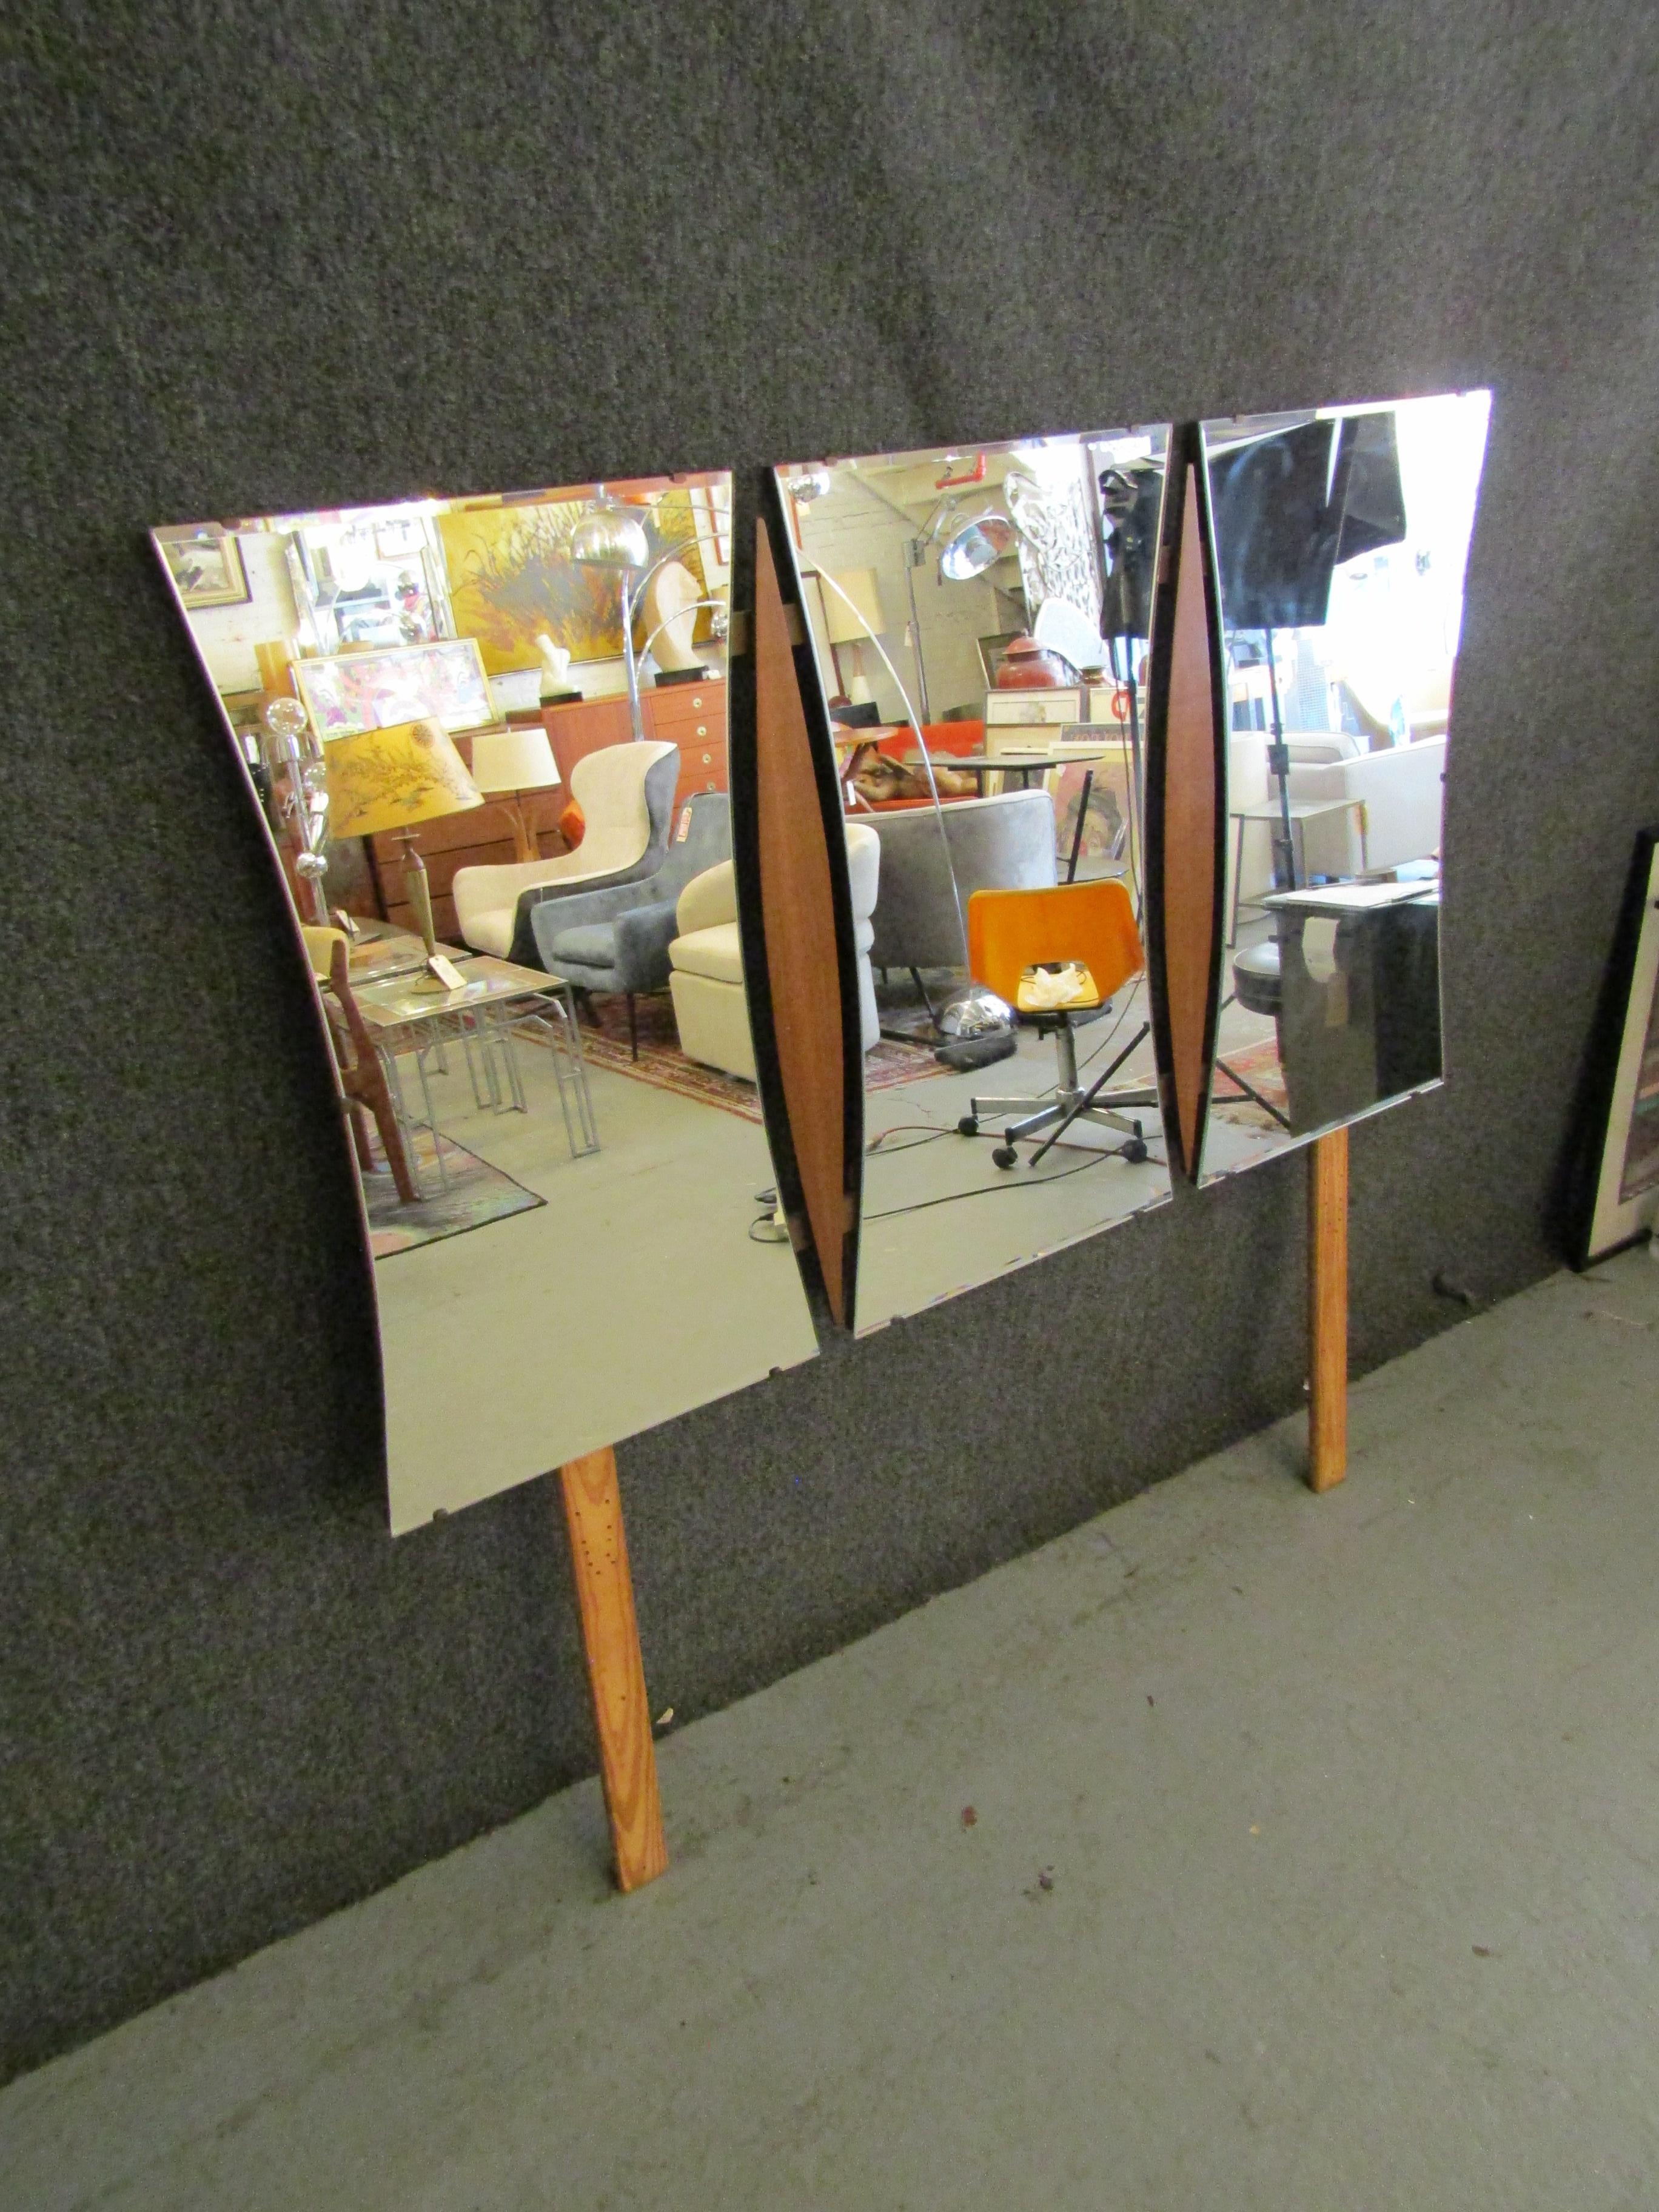 Mid-century modern wall mirror in three curved mirrors connected by sculpted walnut inserts. Back wood mounts can be removed to hang by wire.
Please confirm location NY or NJ